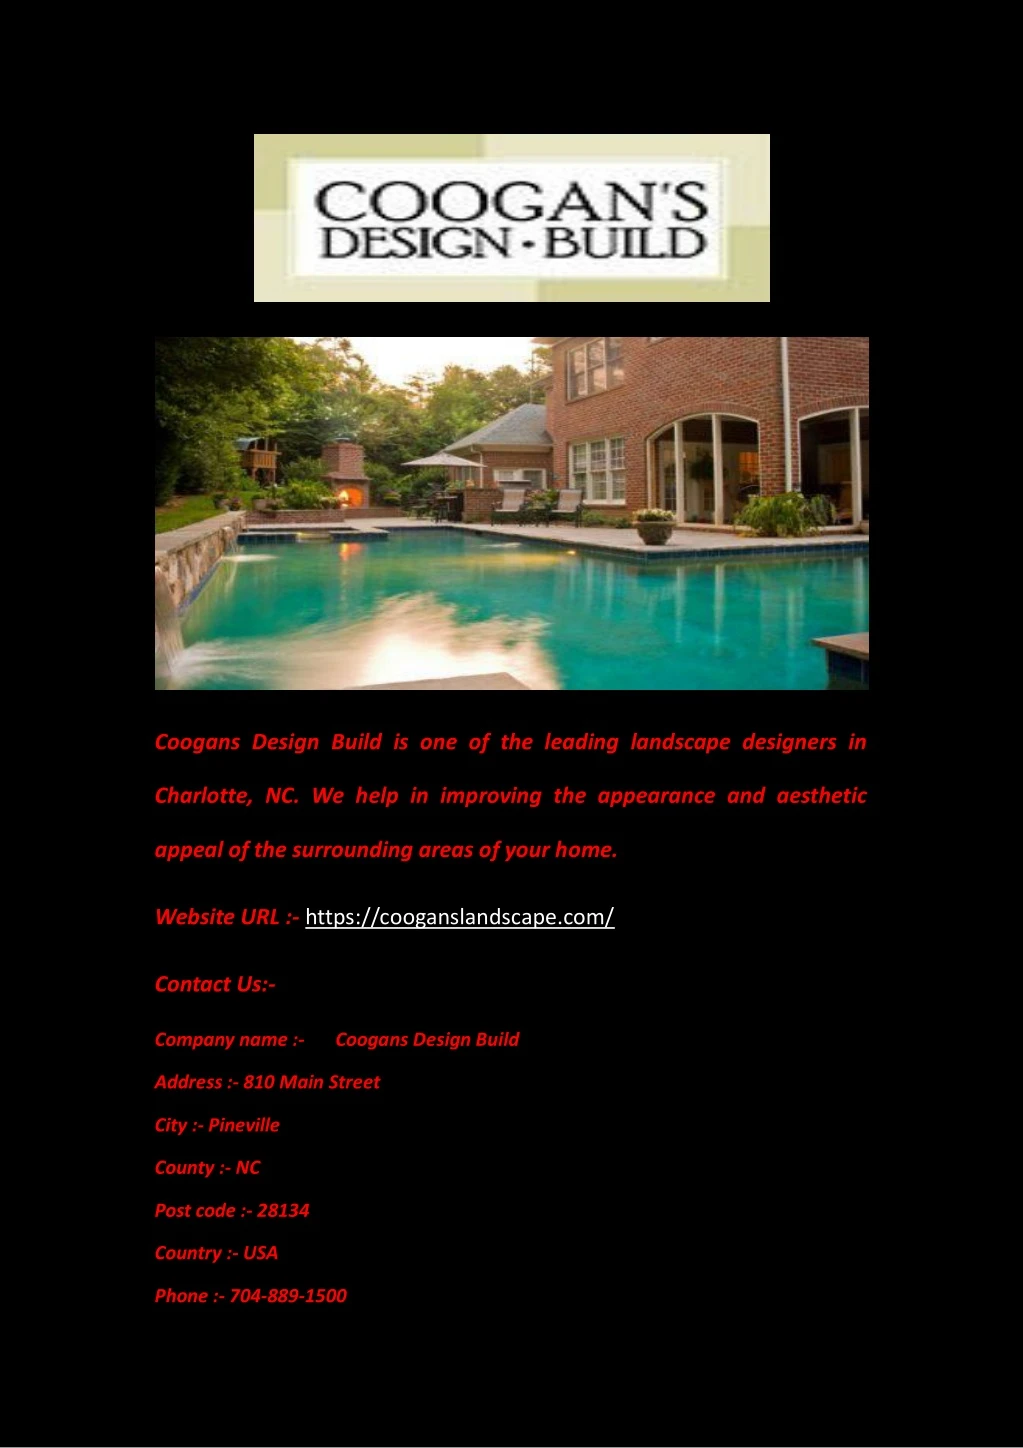 coogans design build is one of the leading